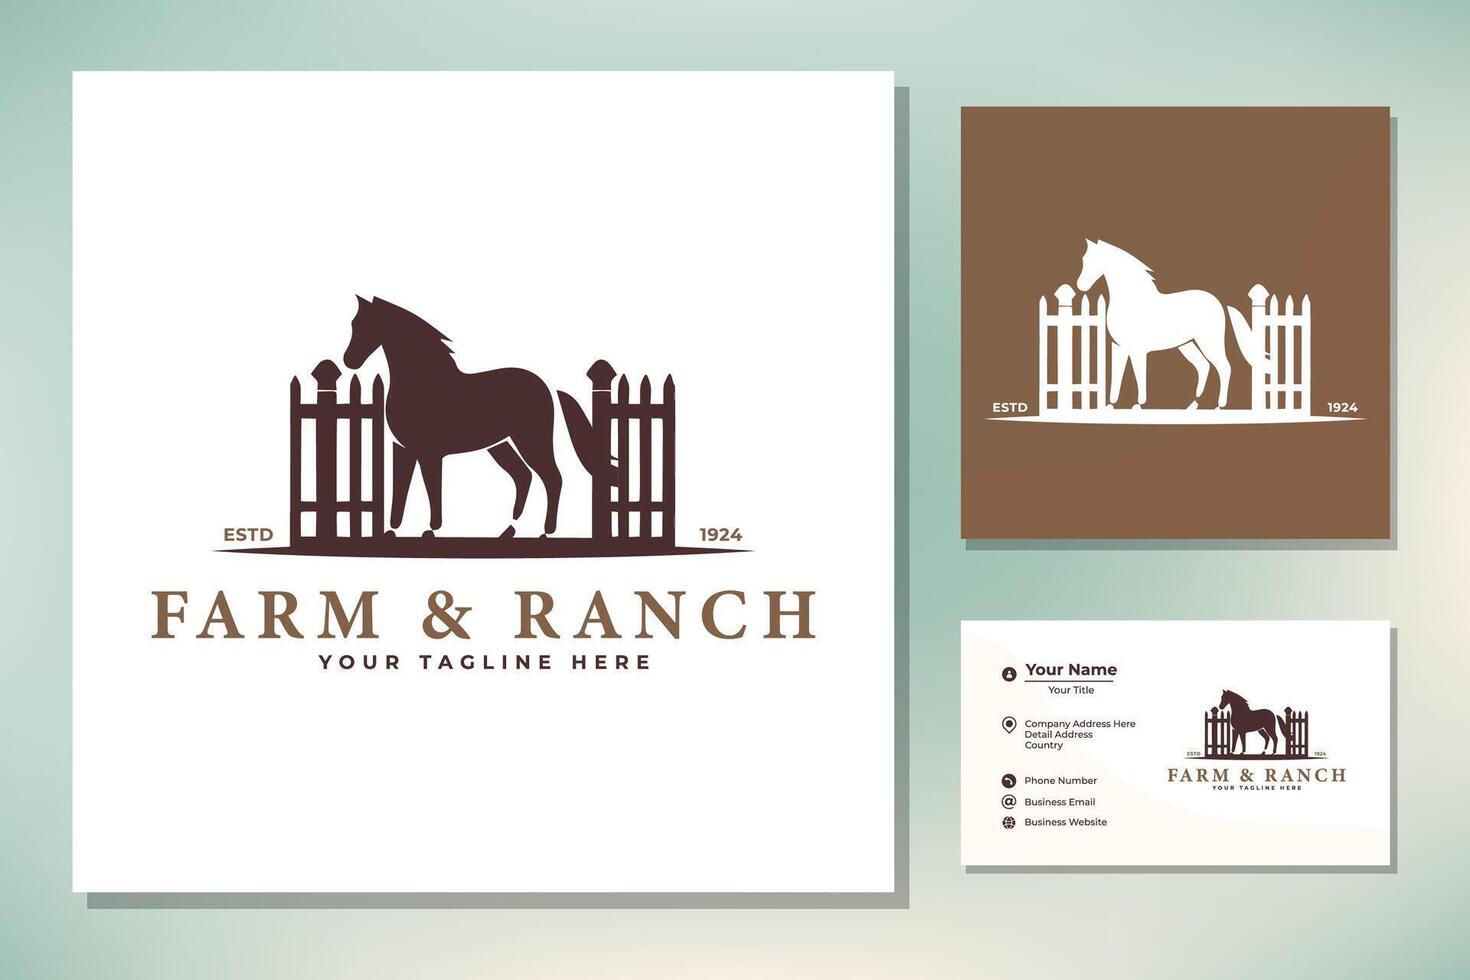 Horse silhouette behind wooden fence paddock vector